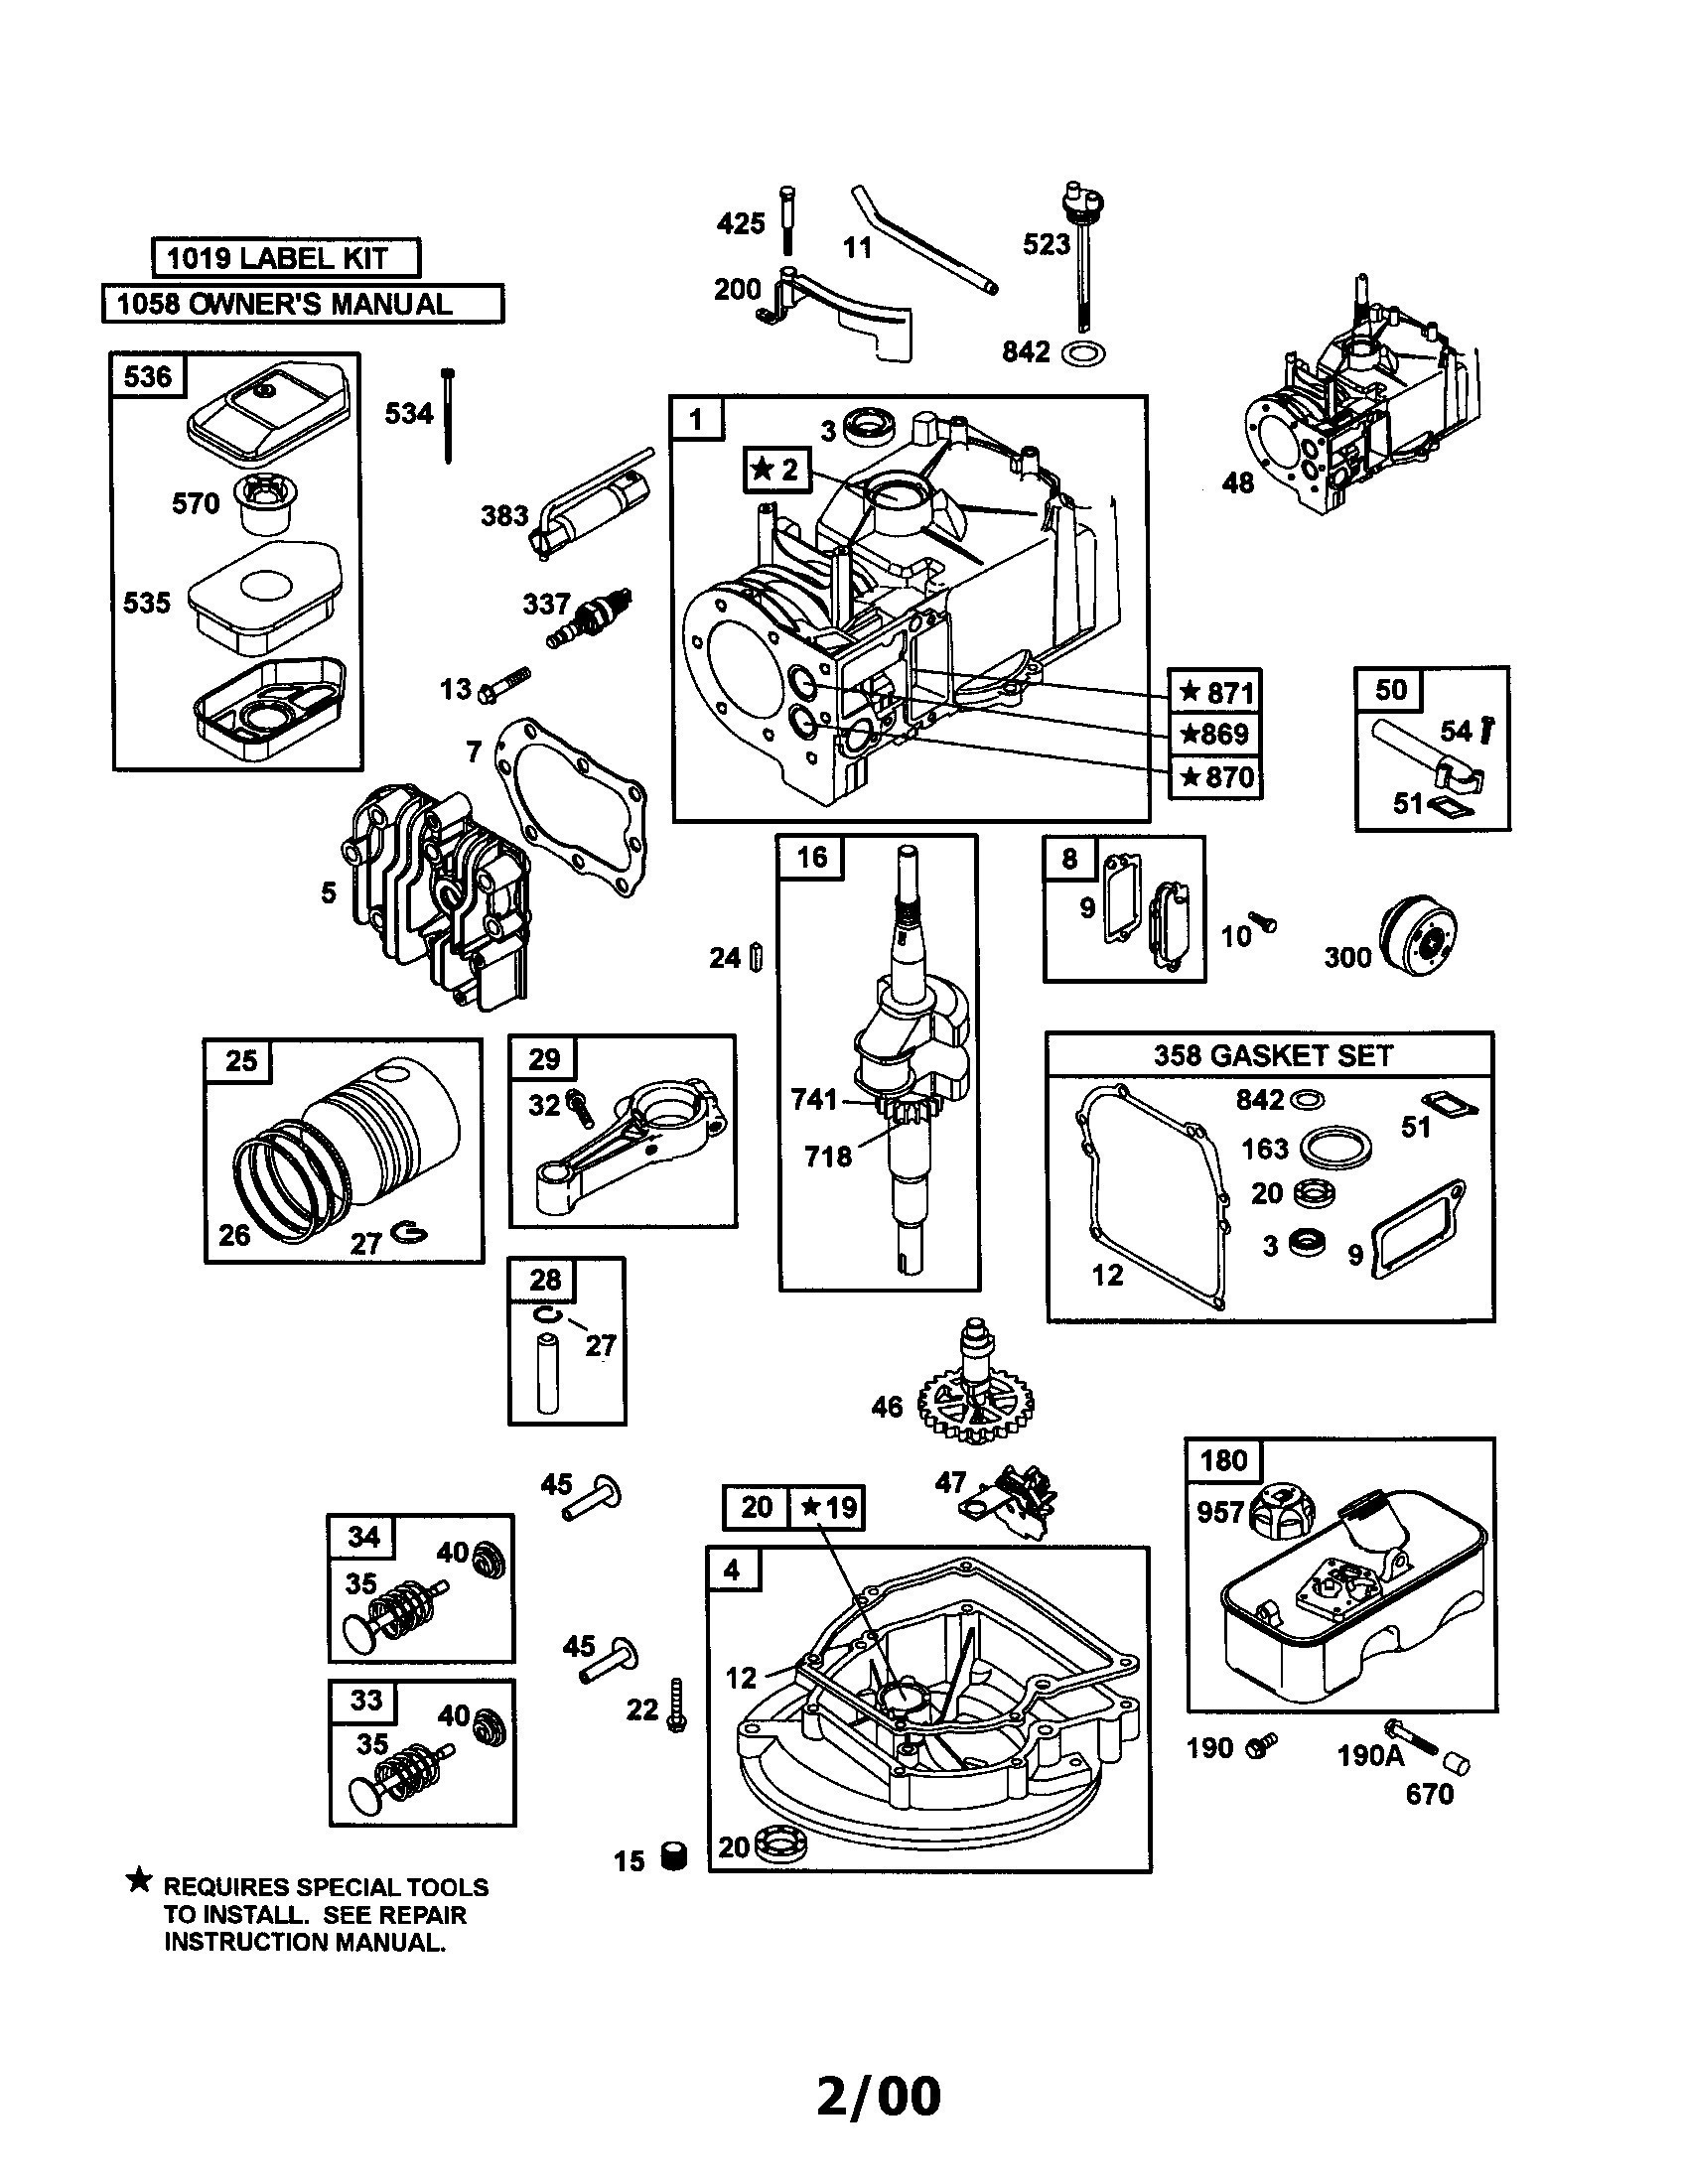 Briggs And Stratton Wiring Diagram 5 Hp Copy Wonderful Beauteous Engine